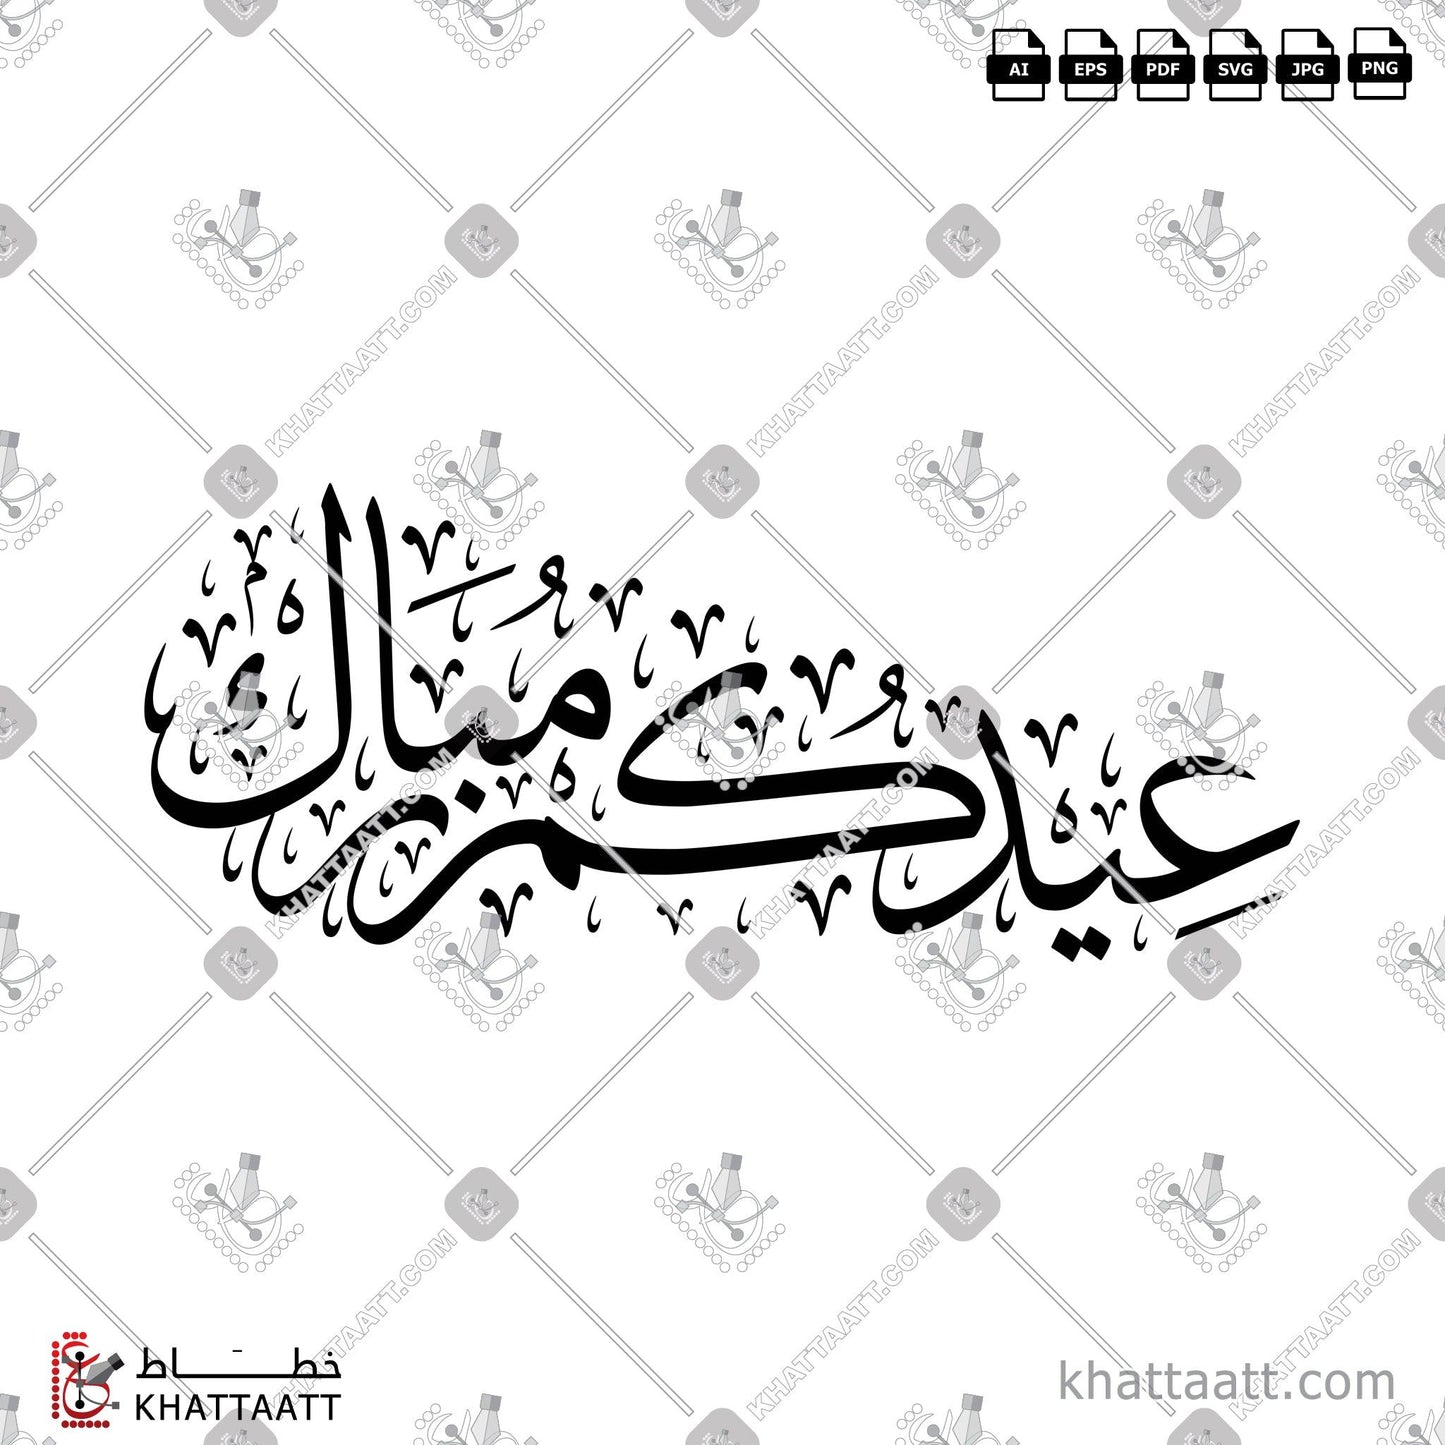 Download Arabic Calligraphy of عيدكم مبارك in Thuluth - خط الثلث in vector and .png